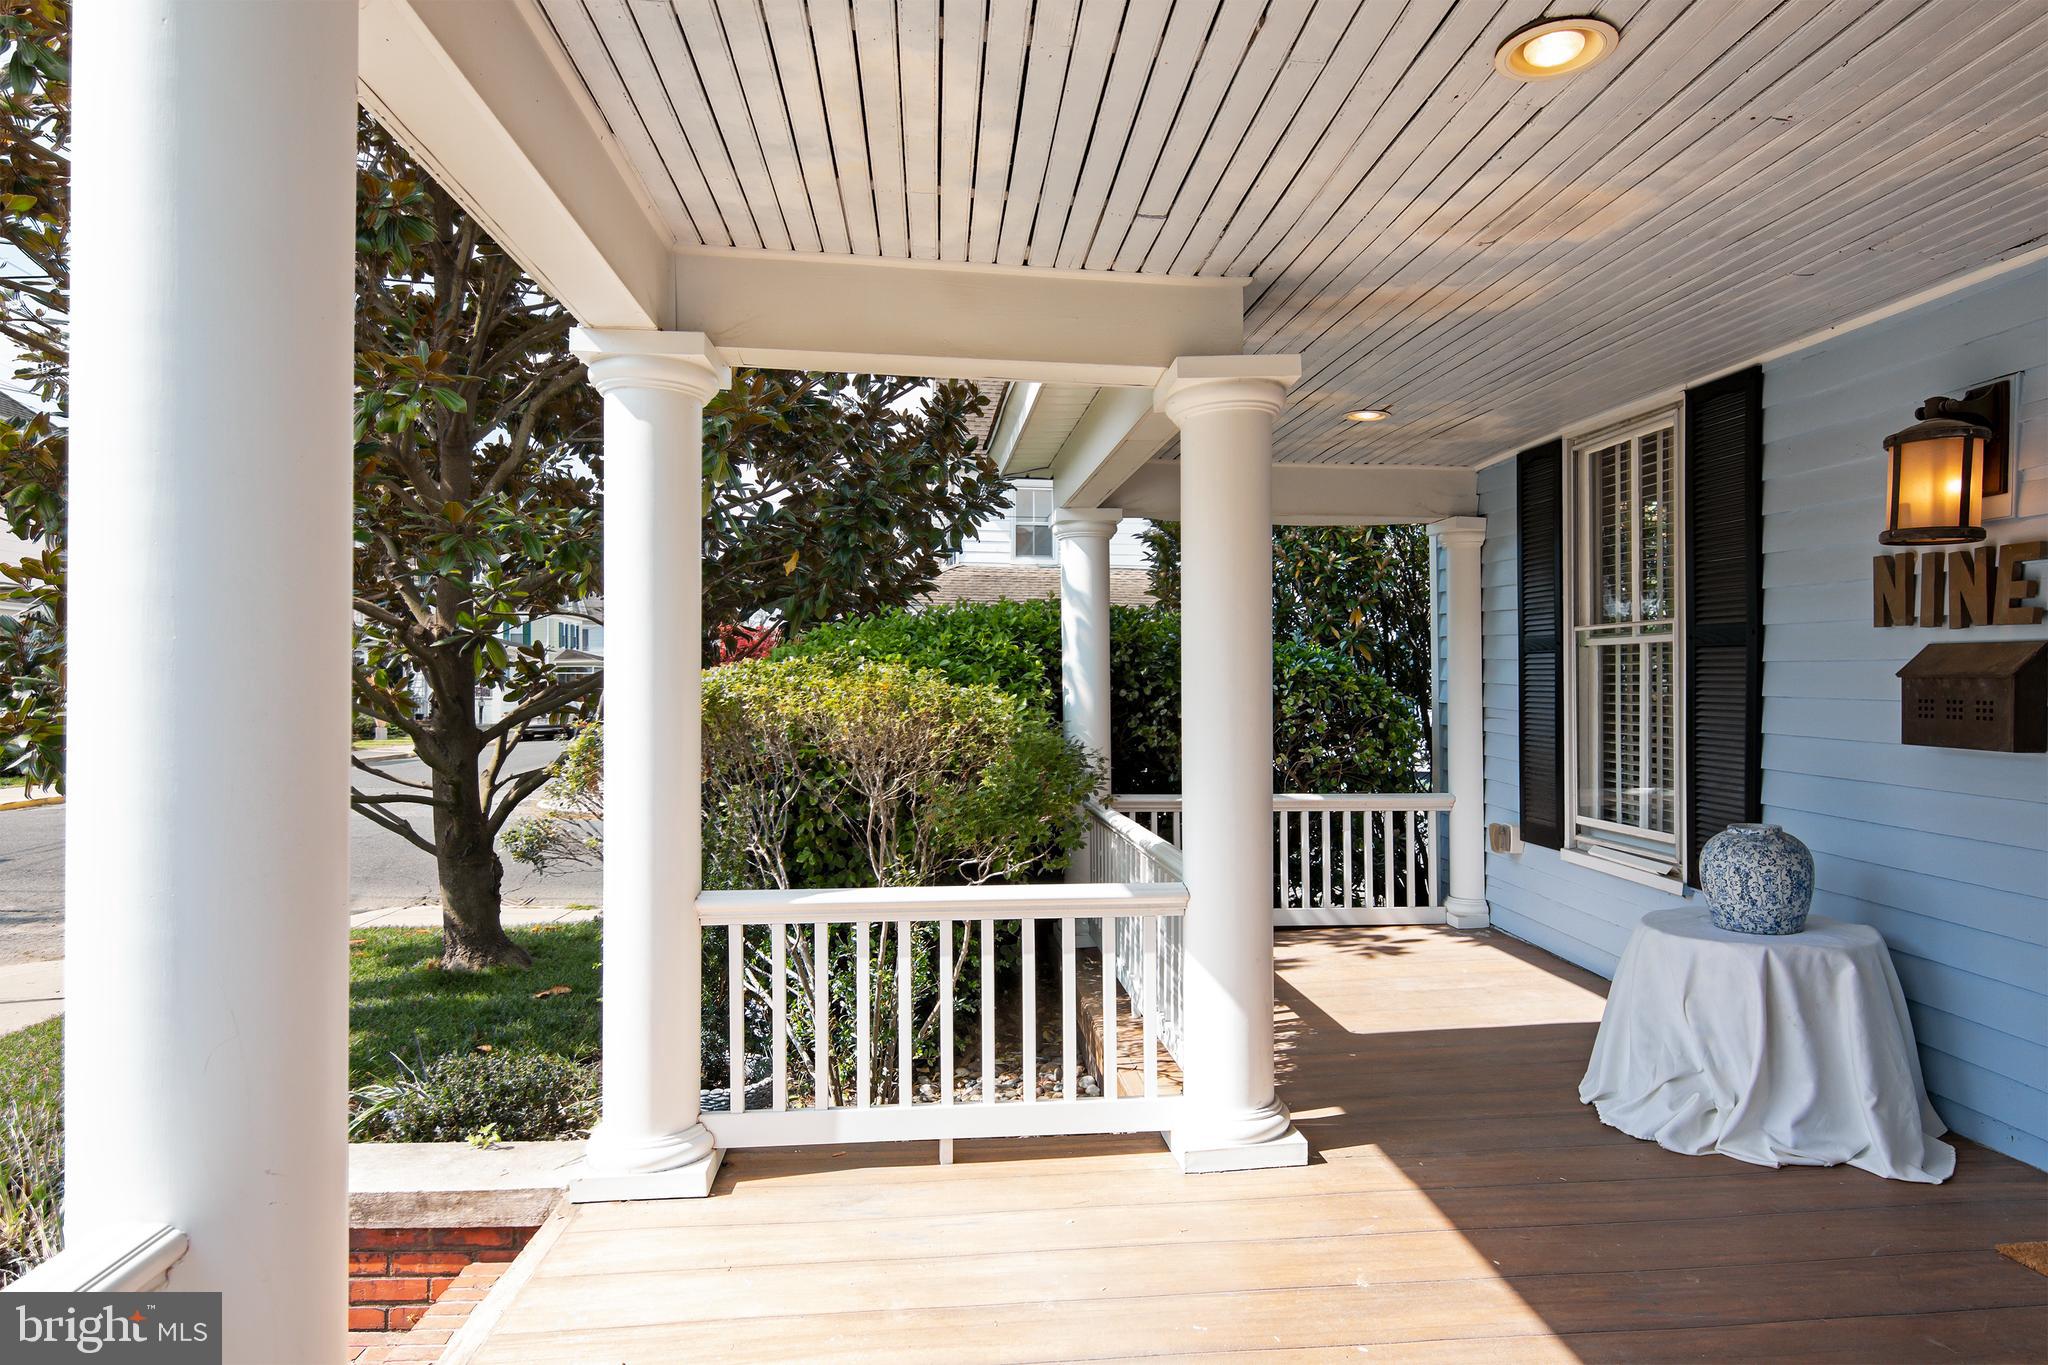 a view of a patio with a table chairs and a porch